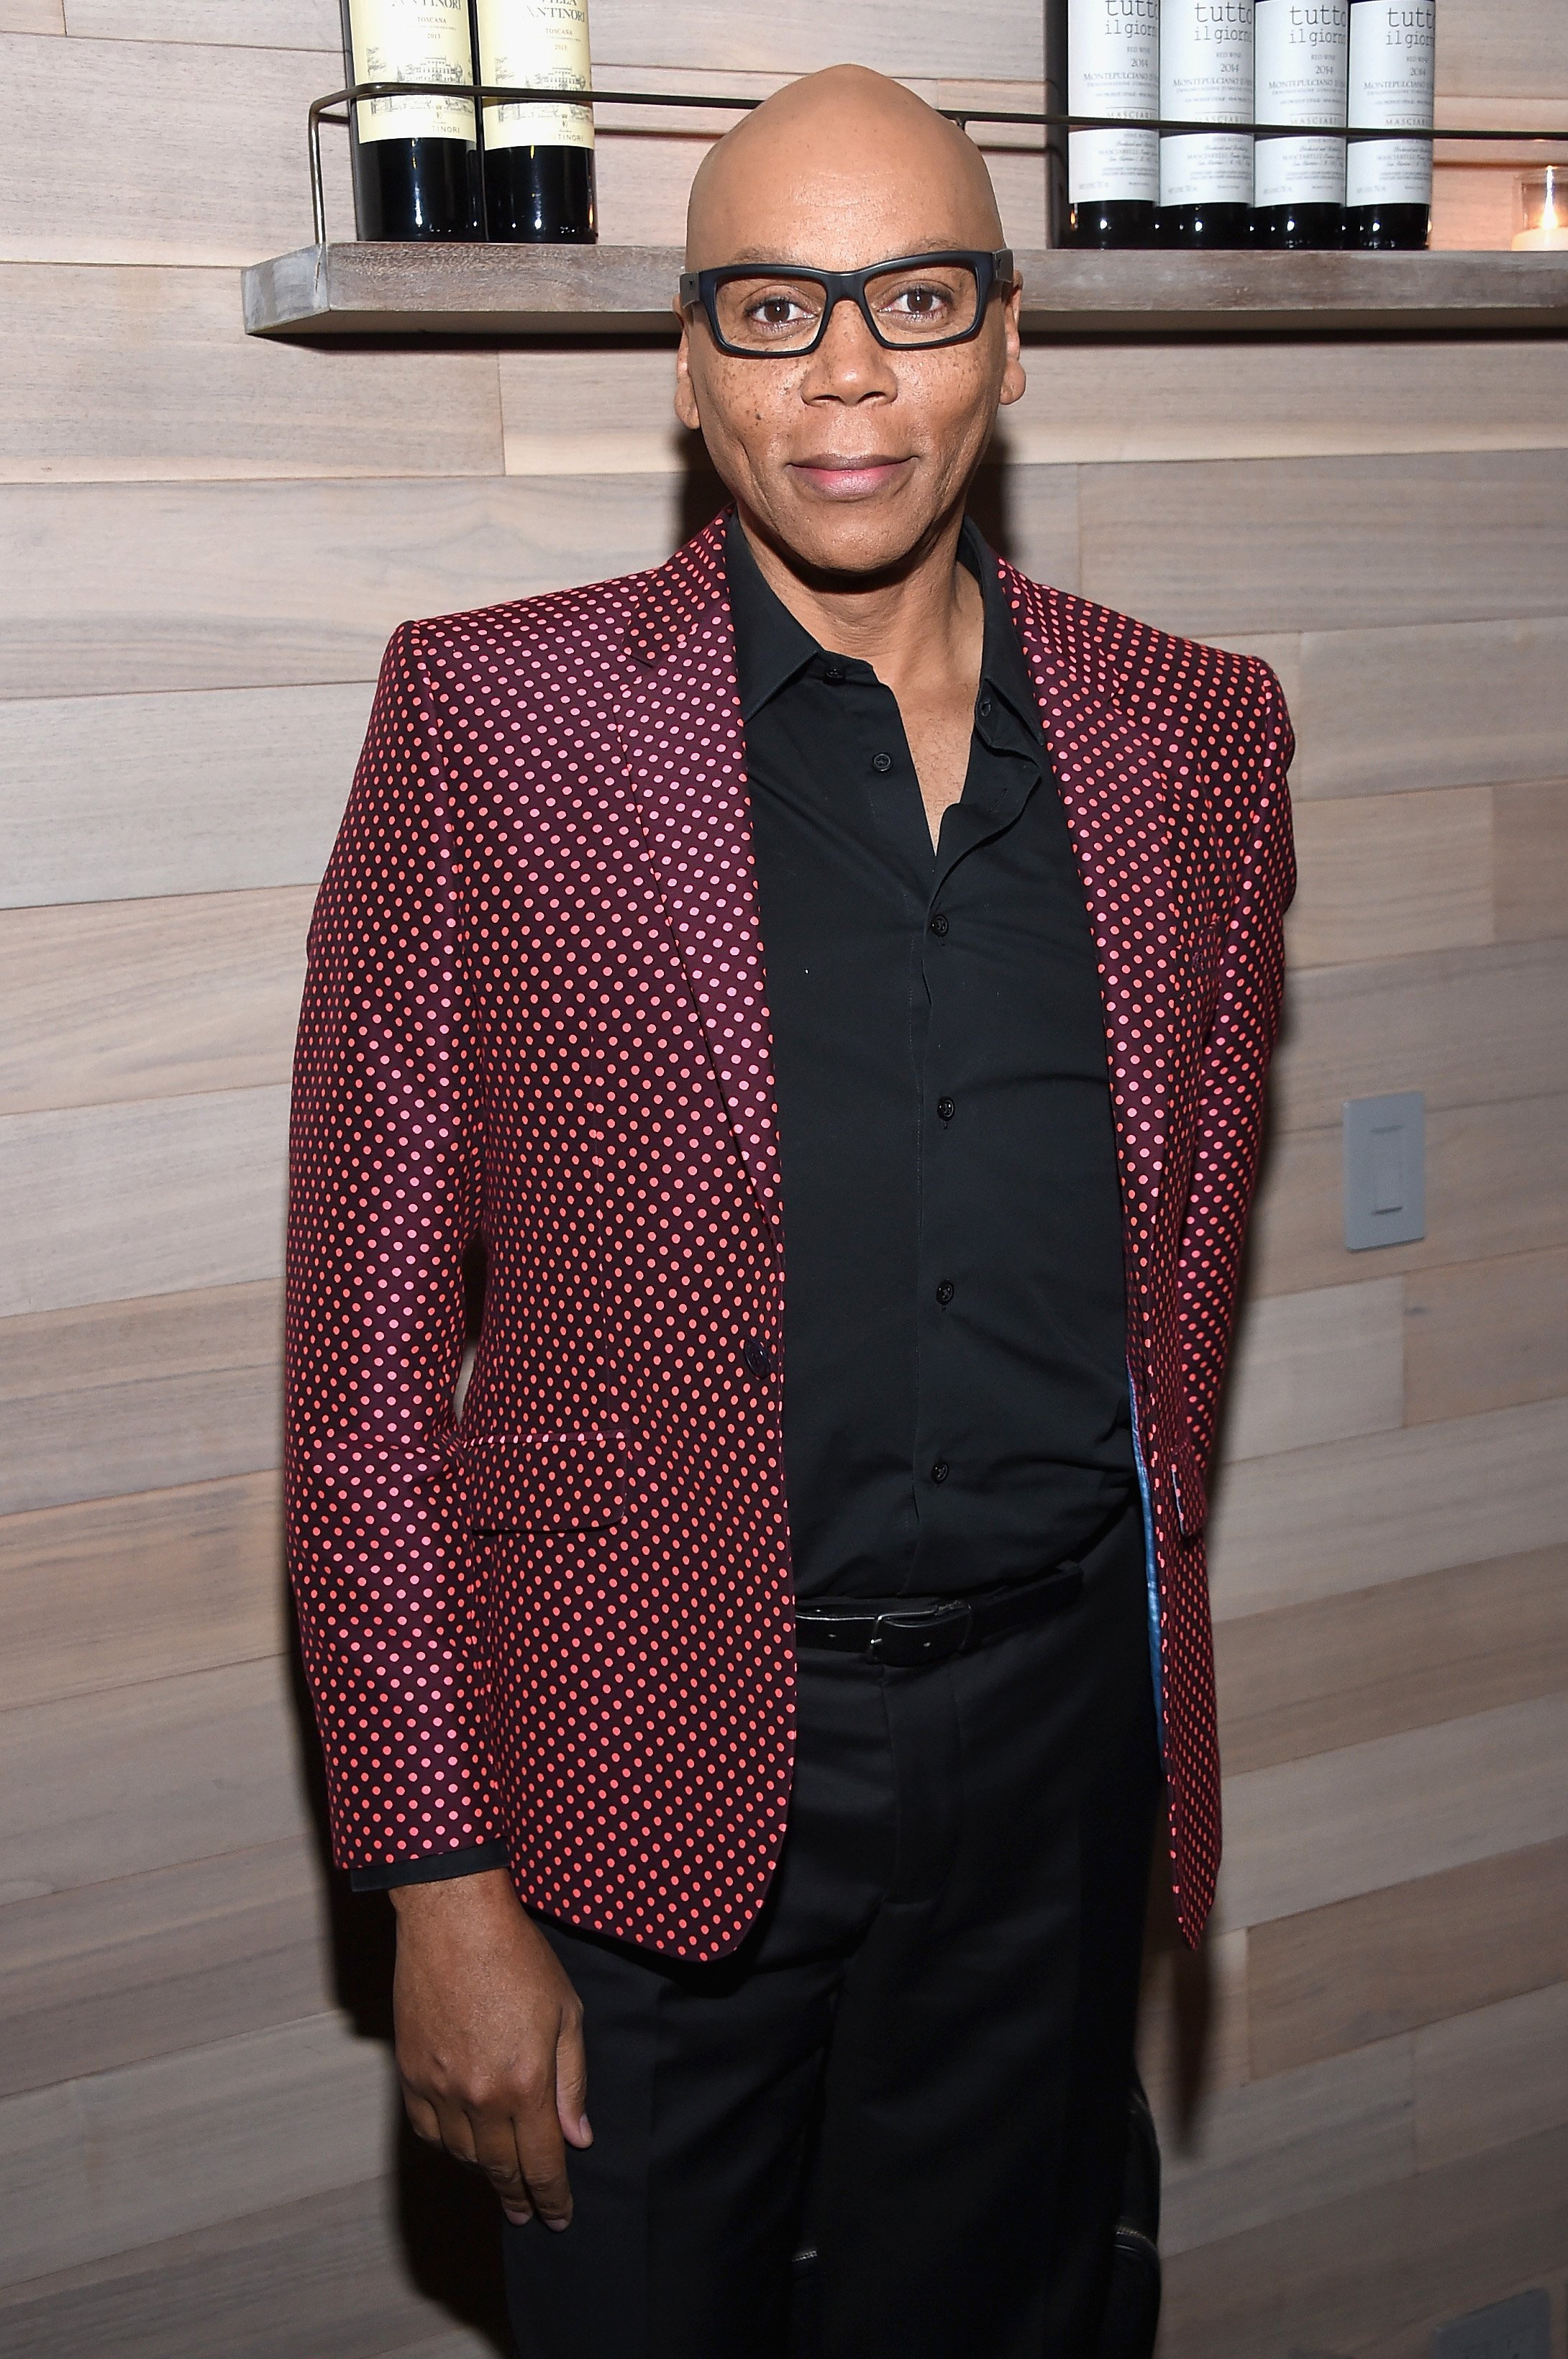 RuPaul attends The Season 2 Premiere Of "Shades Of Blue" after party, hosted by NBC And The Cinema Society at Tutto Il Giorno on March 1, 2017 | Photo: GettyImages